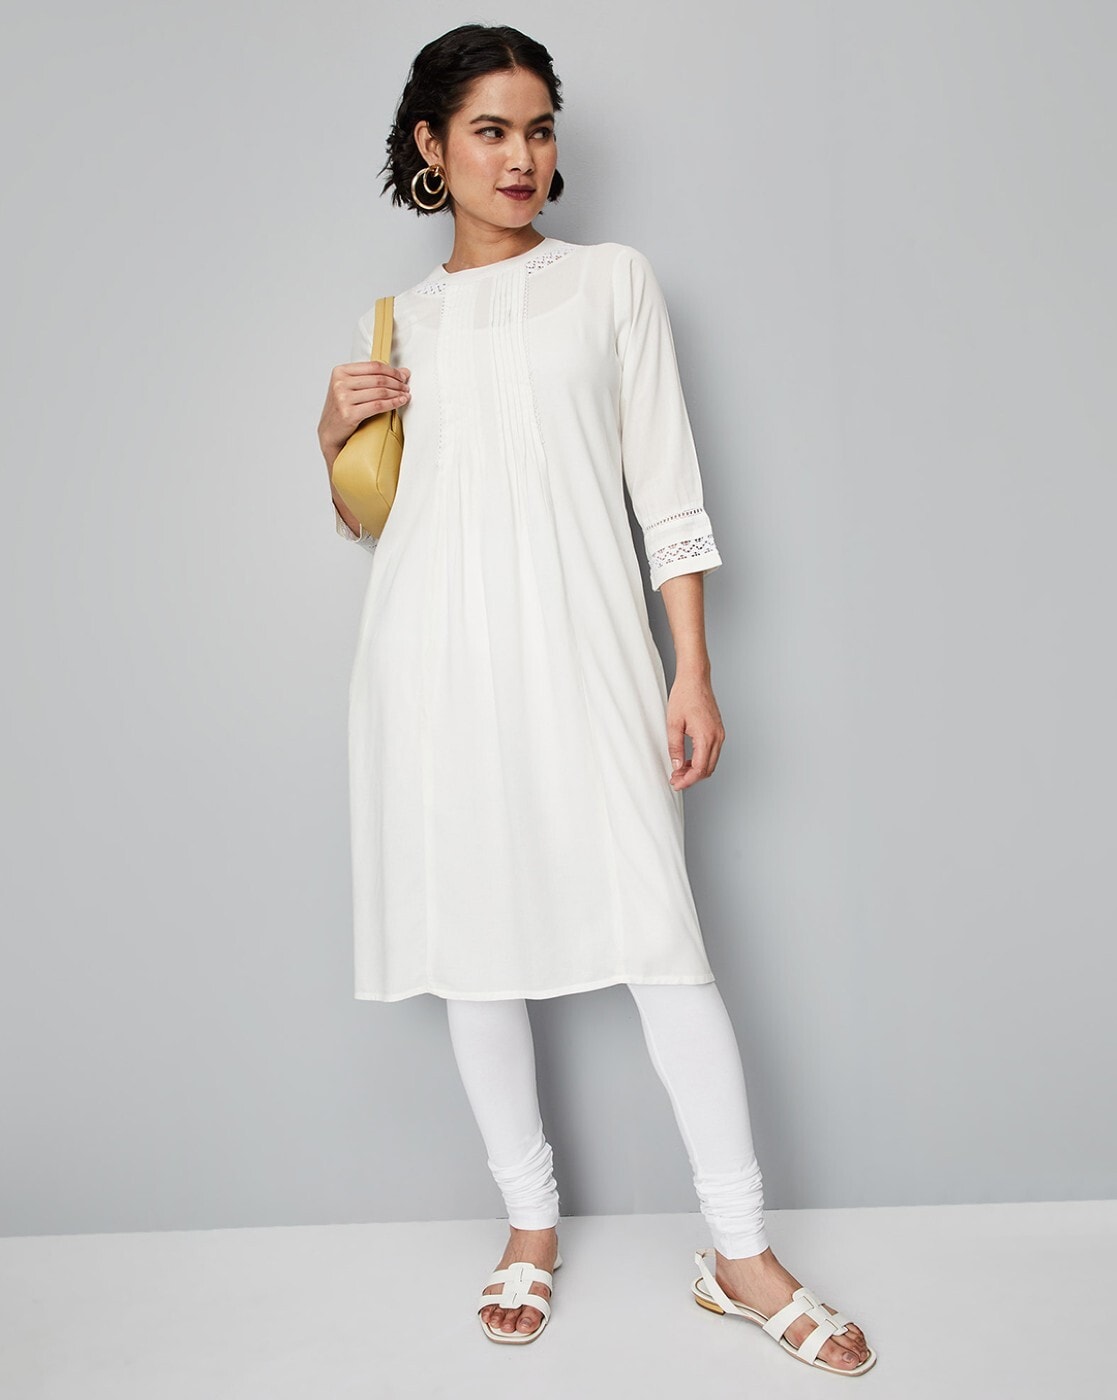 Off White Silk Blend Kurta Set With Floral Embroidery at Soch